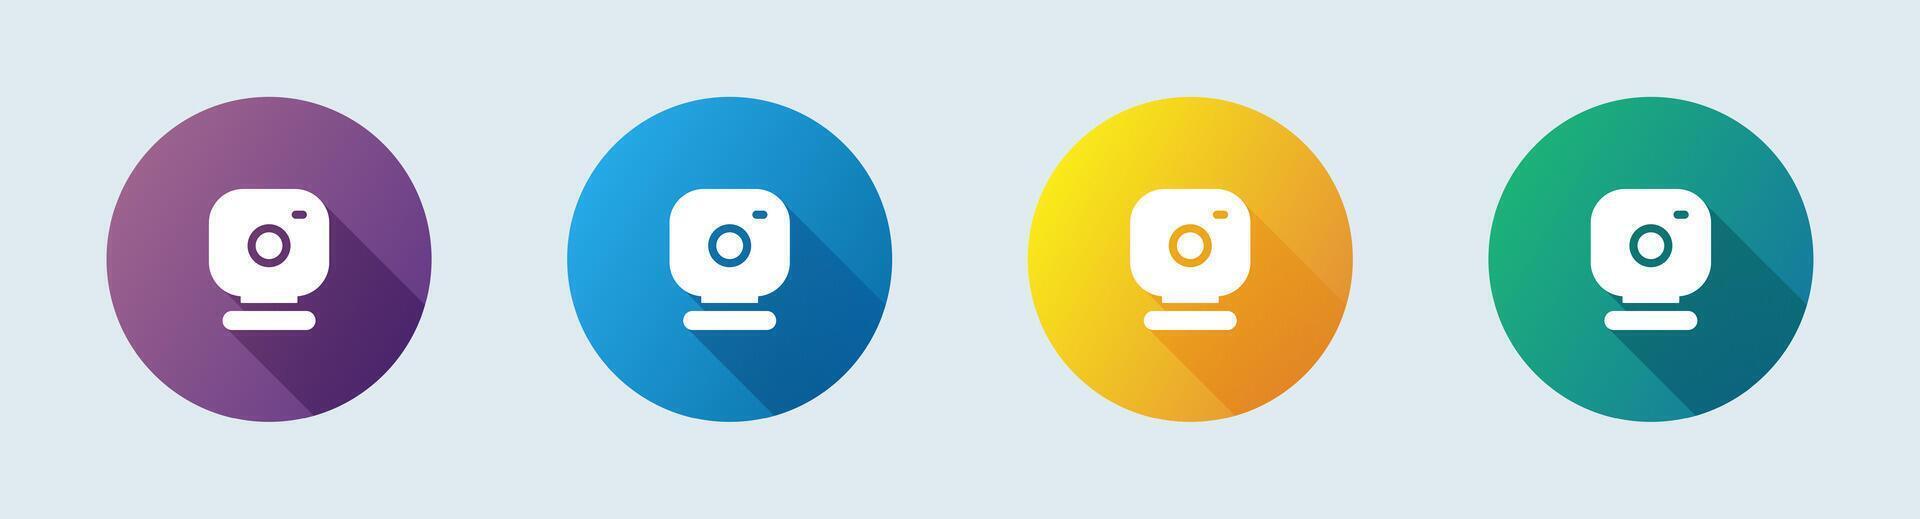 Webcam solid icon in flat design style. Camera signs illustration. vector